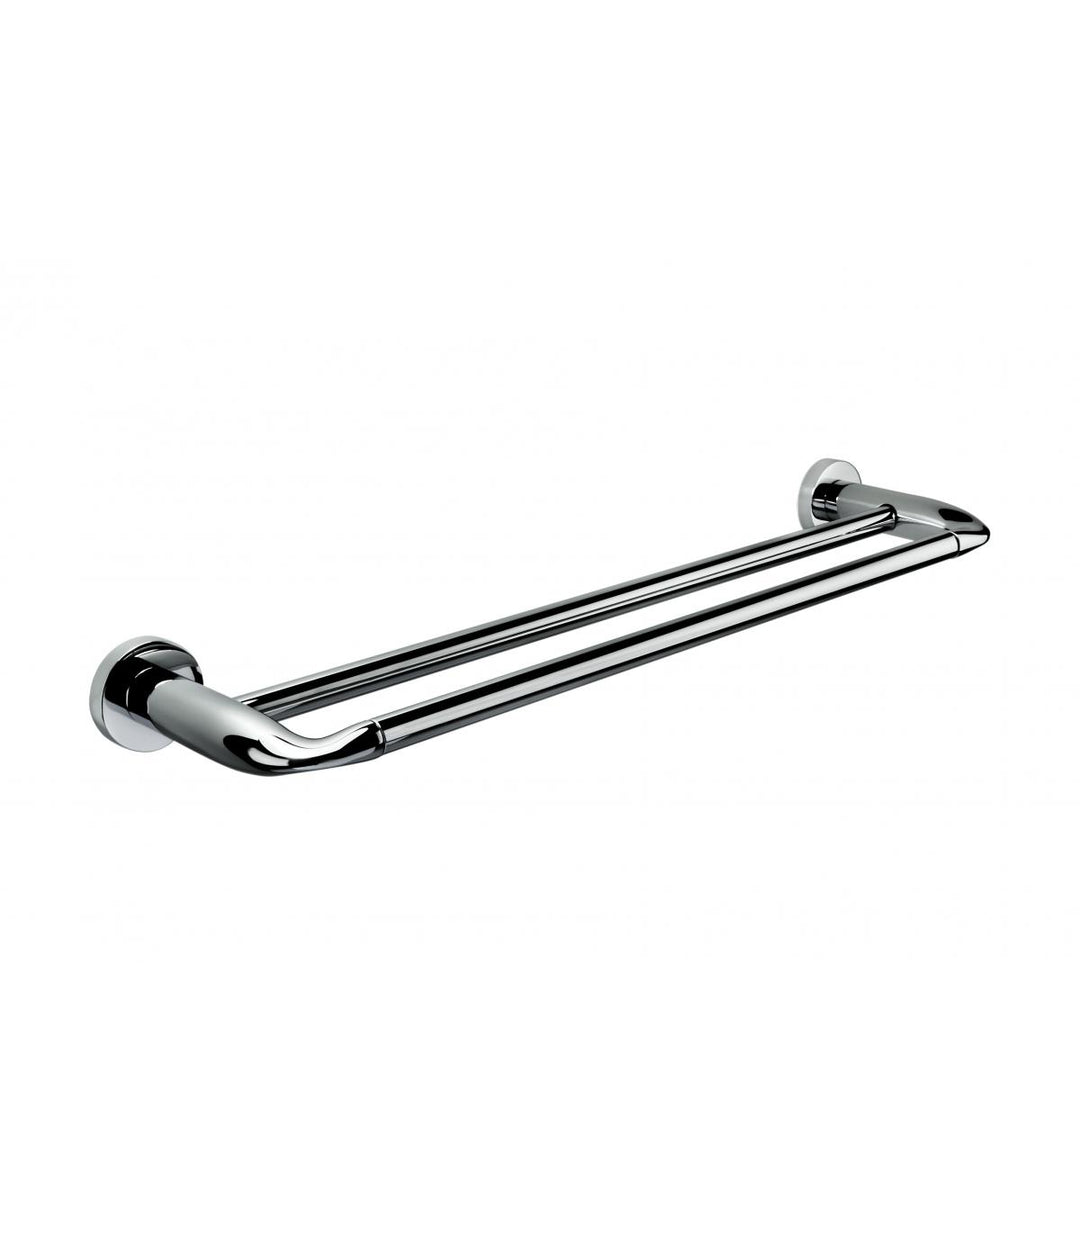 Colombo Design Basic Collection Double Towel Bar - Chrome 18" - cabinetknobsonline